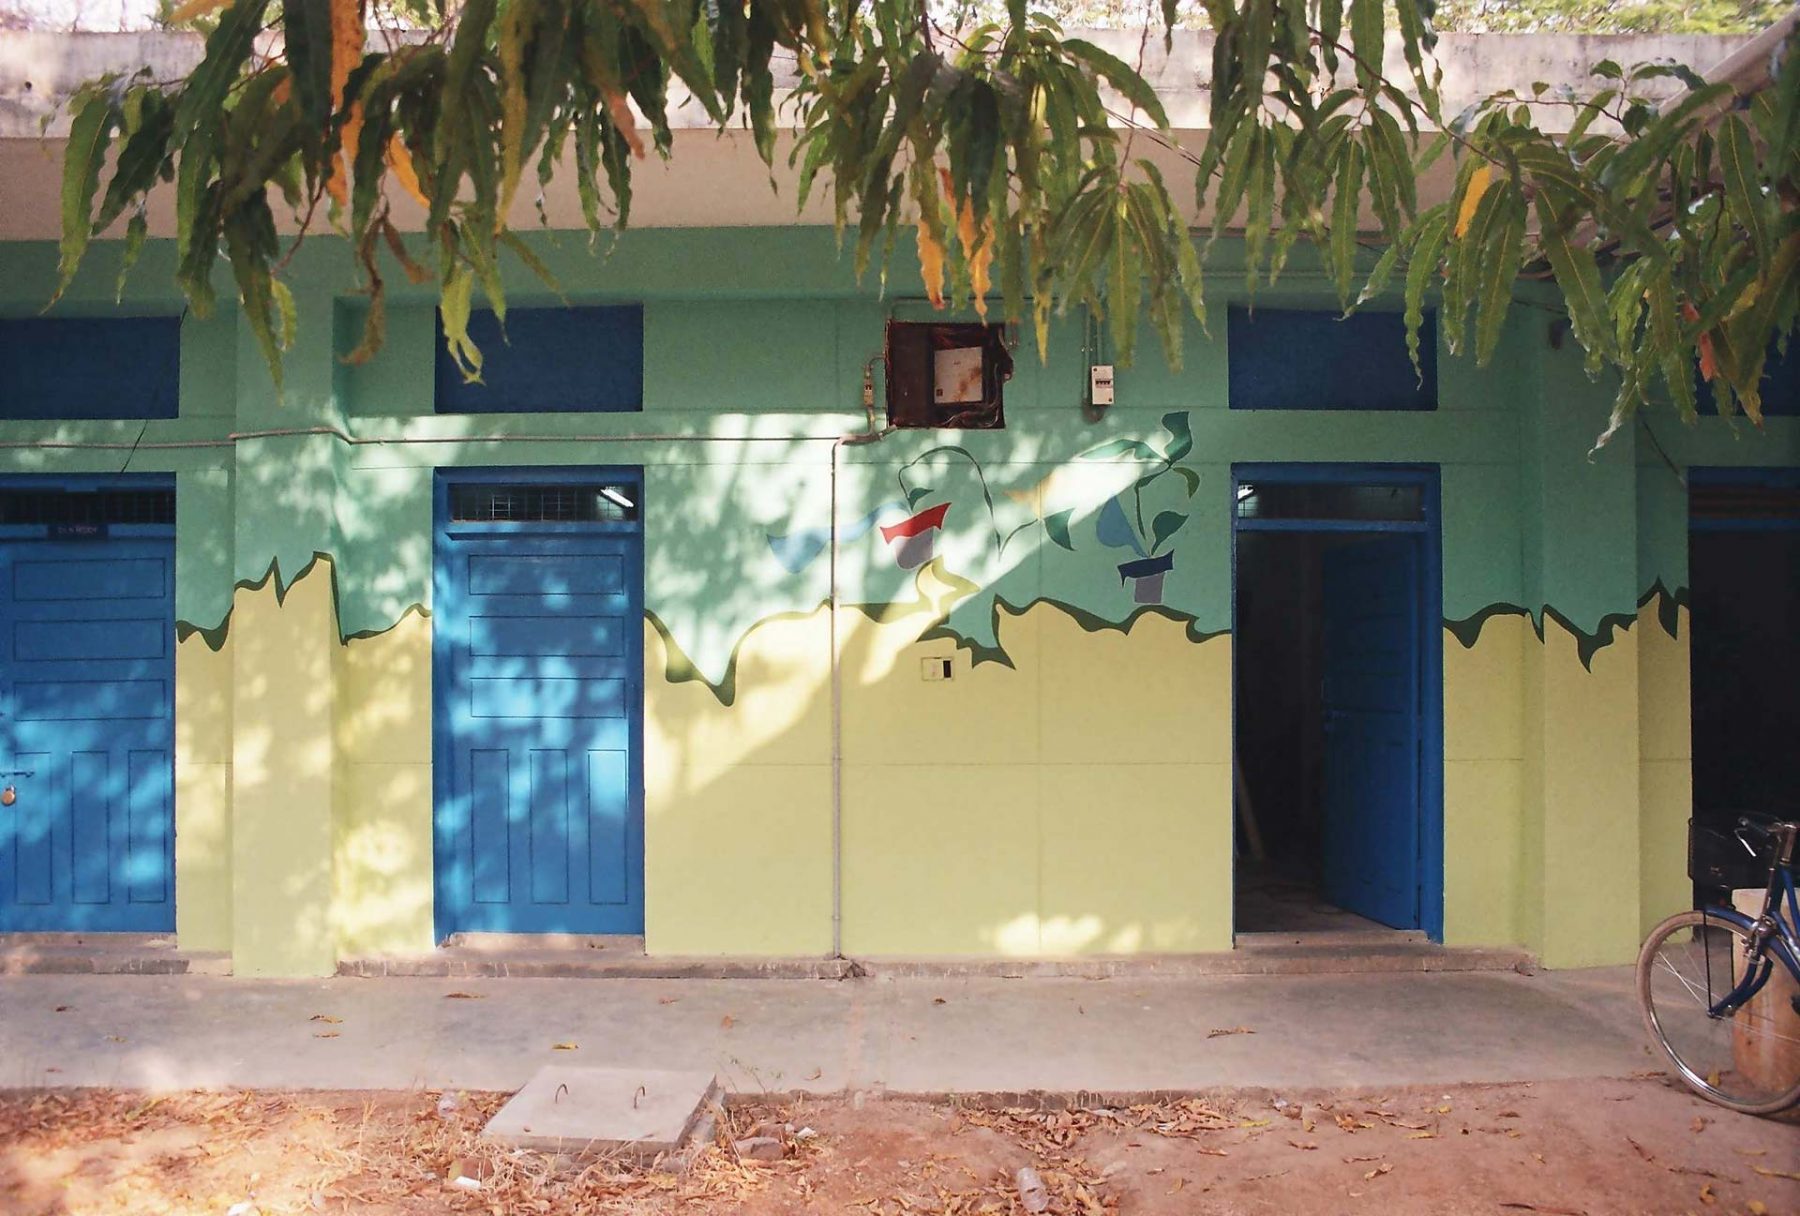 Potted Plants (2005) S.N. School of Fine Arts, University of Hyderabad, series of 9 walls each 3.5H x 5.8W meters, Hyderabad (India)